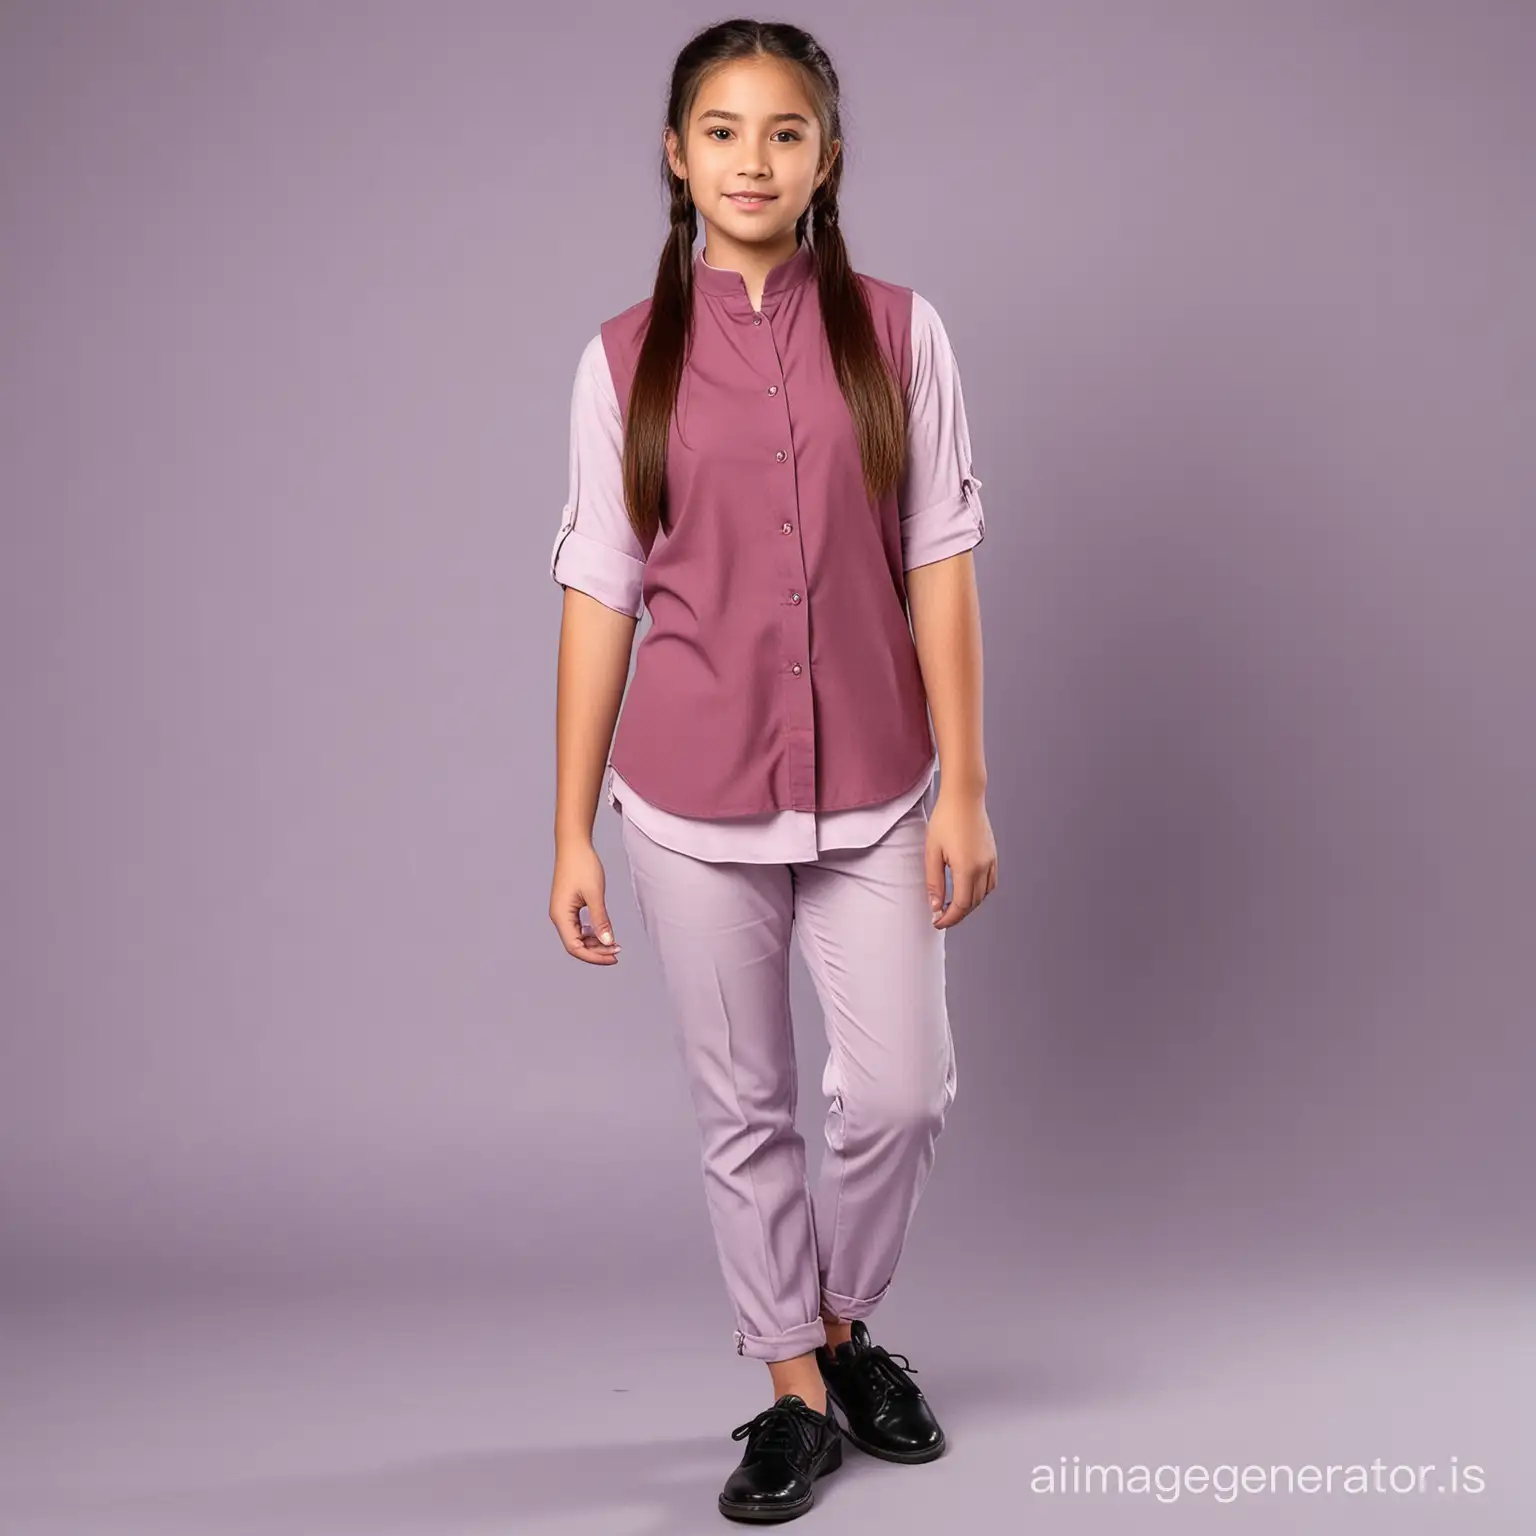 A 15 year old girl, facing camera, standing straight, wearing light lavender half sleeve shirt with Chinese collar. Pony tailed hair. Merlot color vest over light lavender full sleeve shirt, a merlot color full length pants. She has black school cut shoes on her foot.